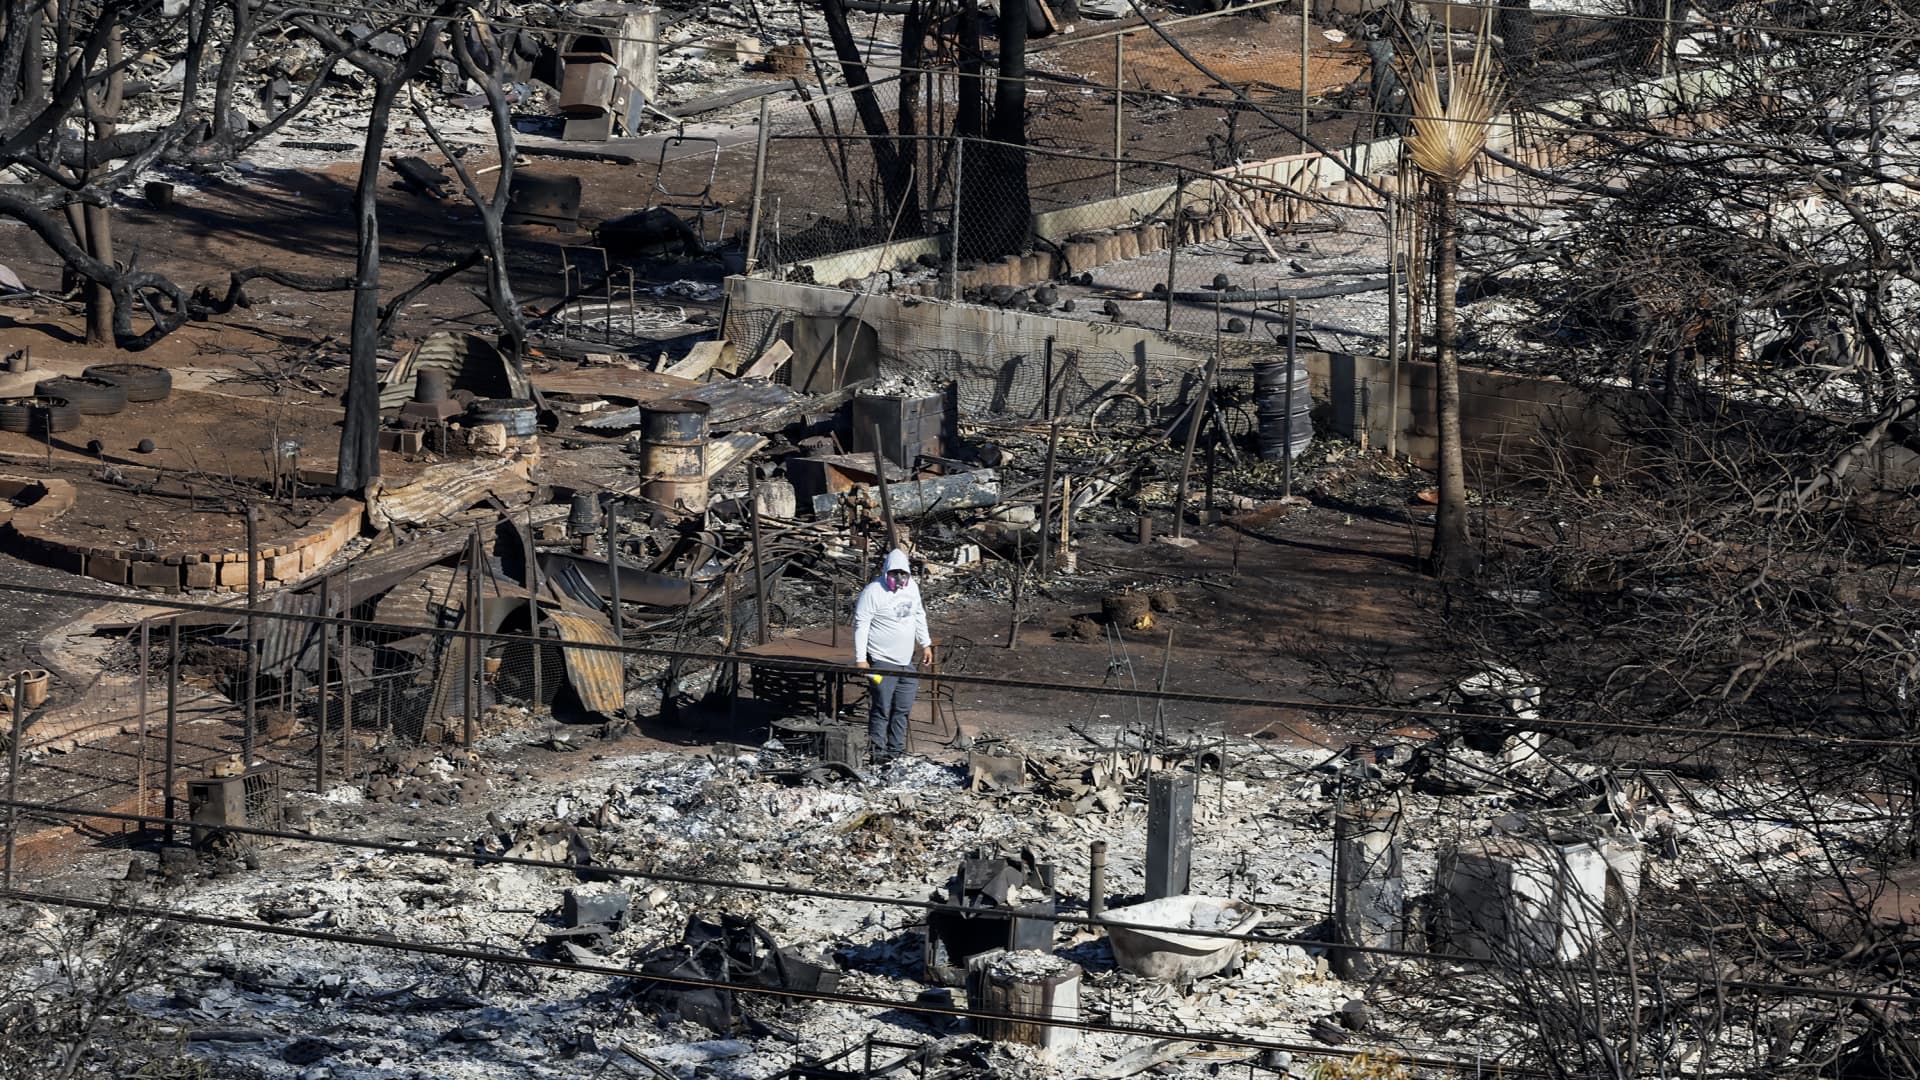 Death toll from Hawaii wildfires will rise as search teams comb Lahaina wreckage, governor says